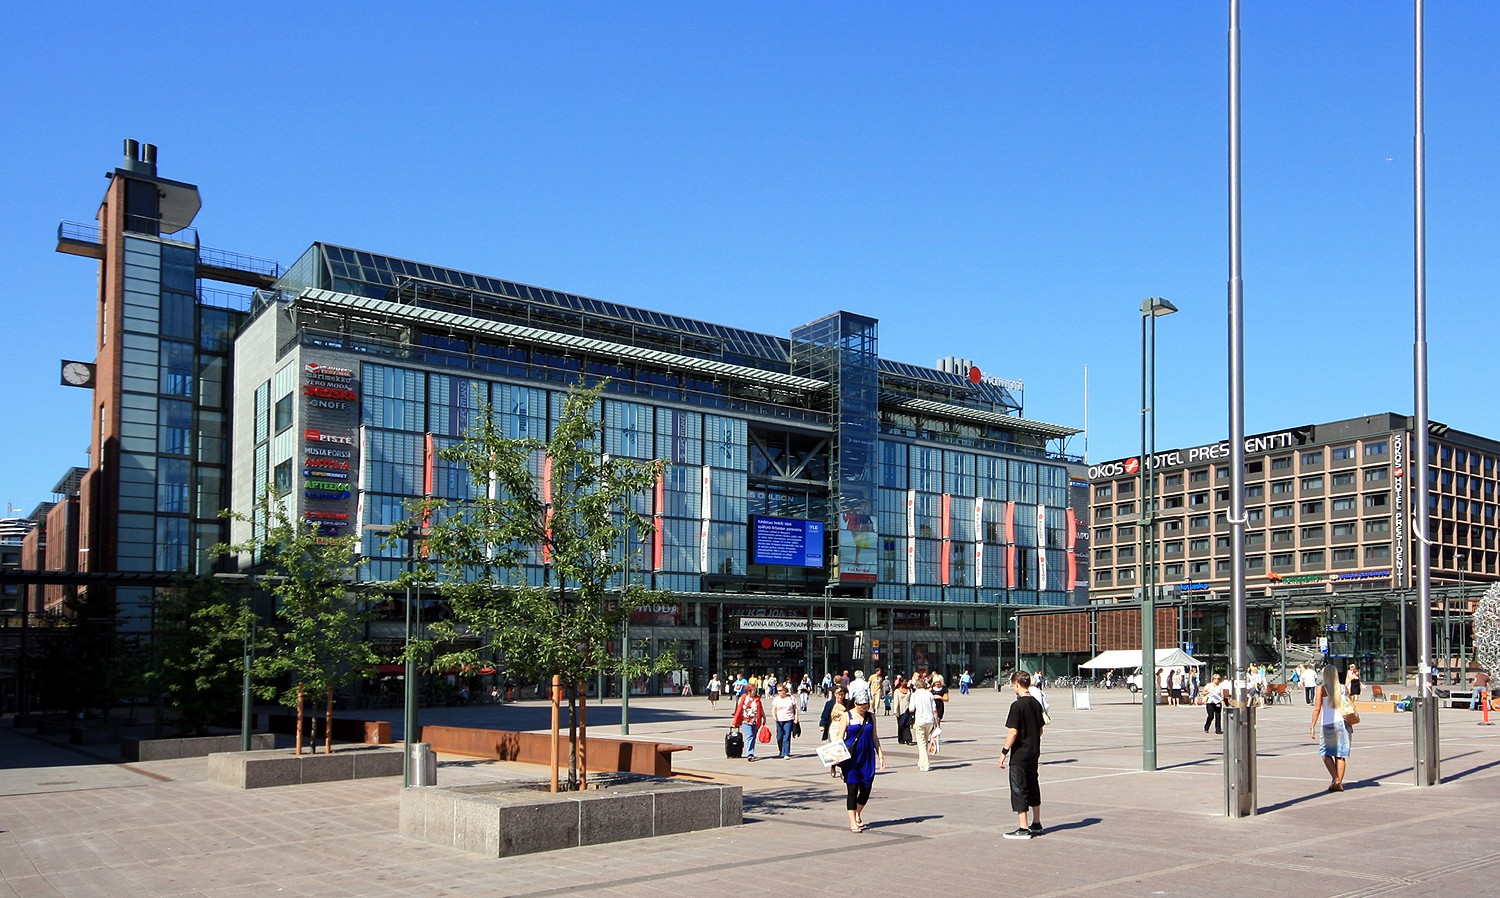 C&W advises the purchase of Kamppi shopping centre